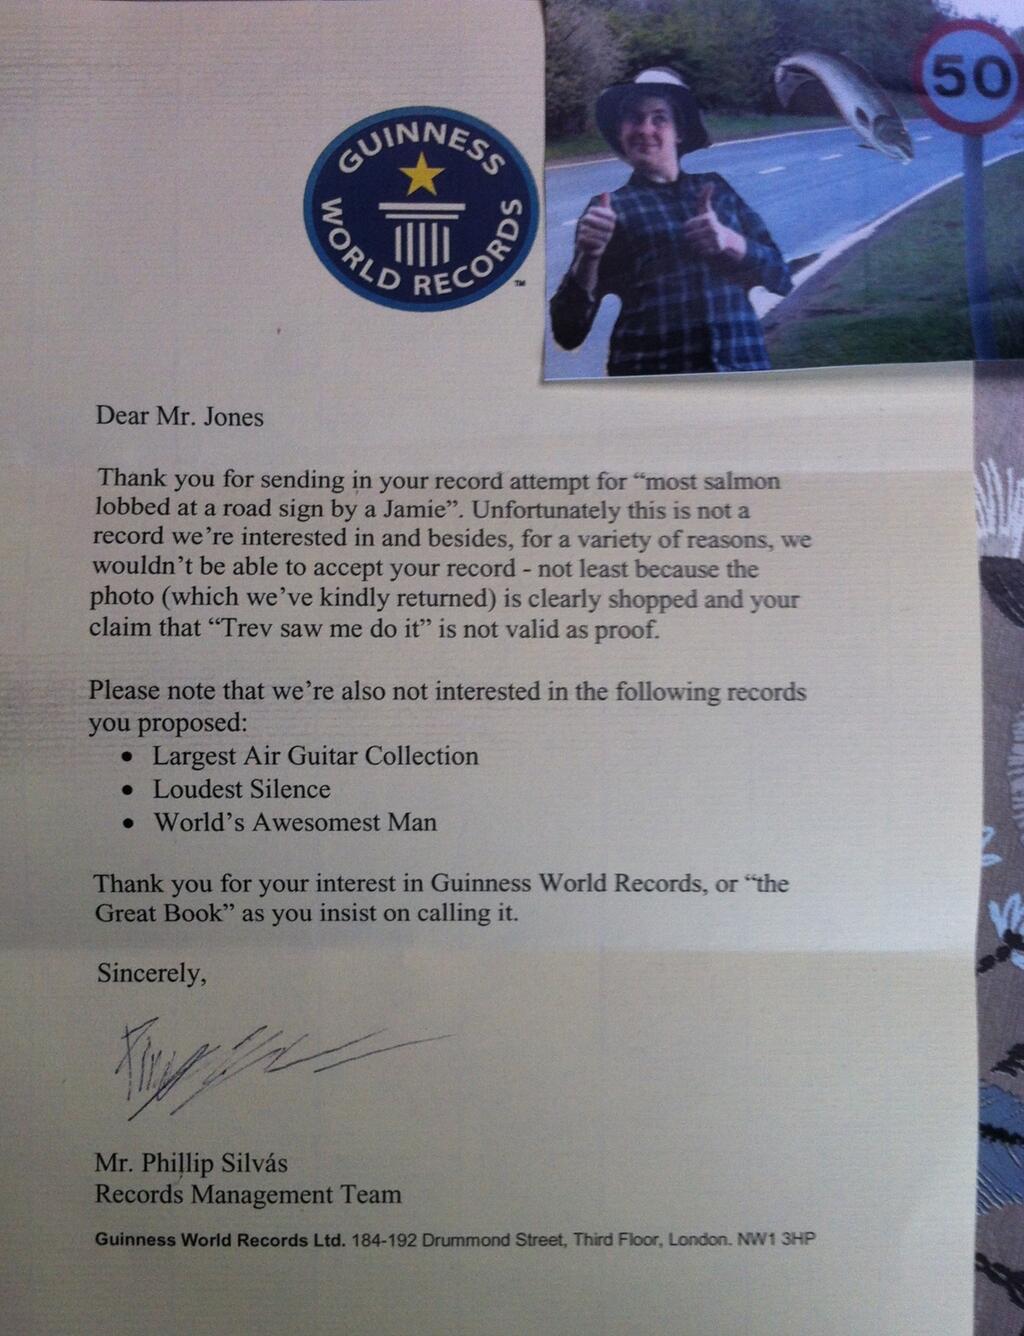 guinness world record rejection letter - Sess Guin Wo Dre Cor Dear Mr. Jones Thank you for sending in your record attempt for most salmon lobbed at a road sign by a Jamie". Unfortunately this is not a record we're interested in and besides, for a variety 